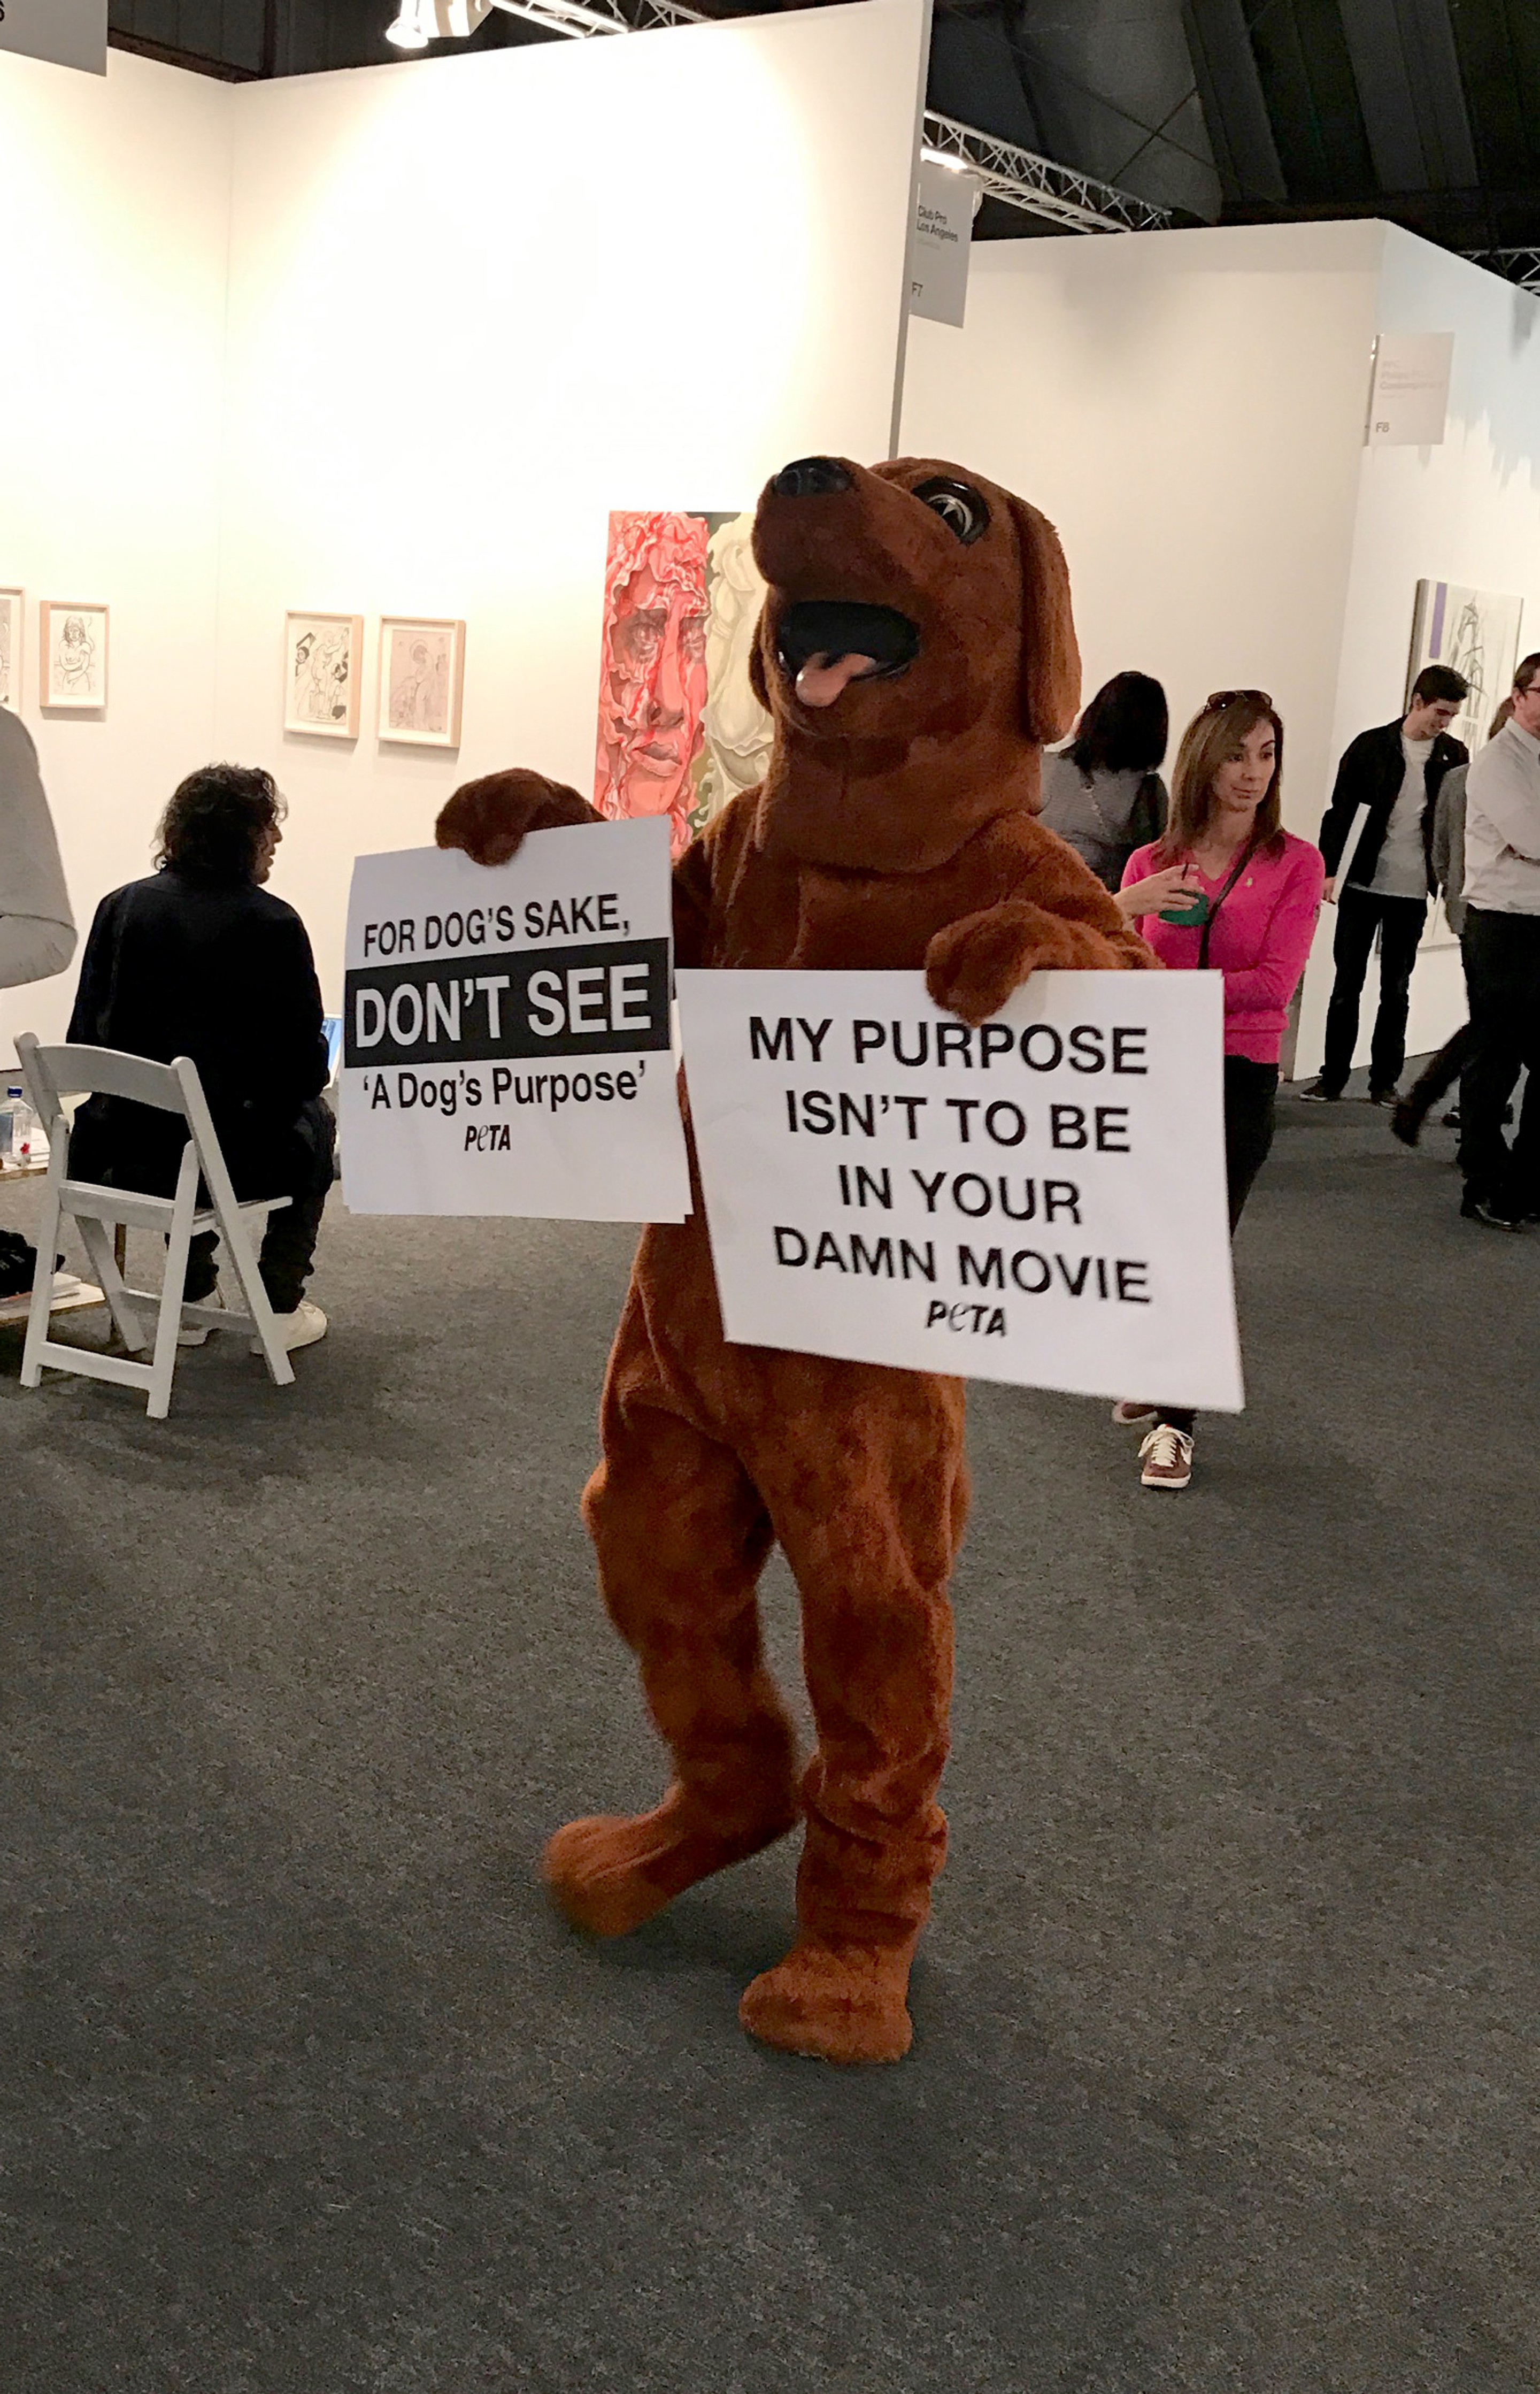 PETA Protester (My Purpose Isn't To Be In Your Damn Movie)(For Dog's Sake, Don't See 'A Dog's Purpose'), 2017
Performance: Dog costume, performer, signs
Unique